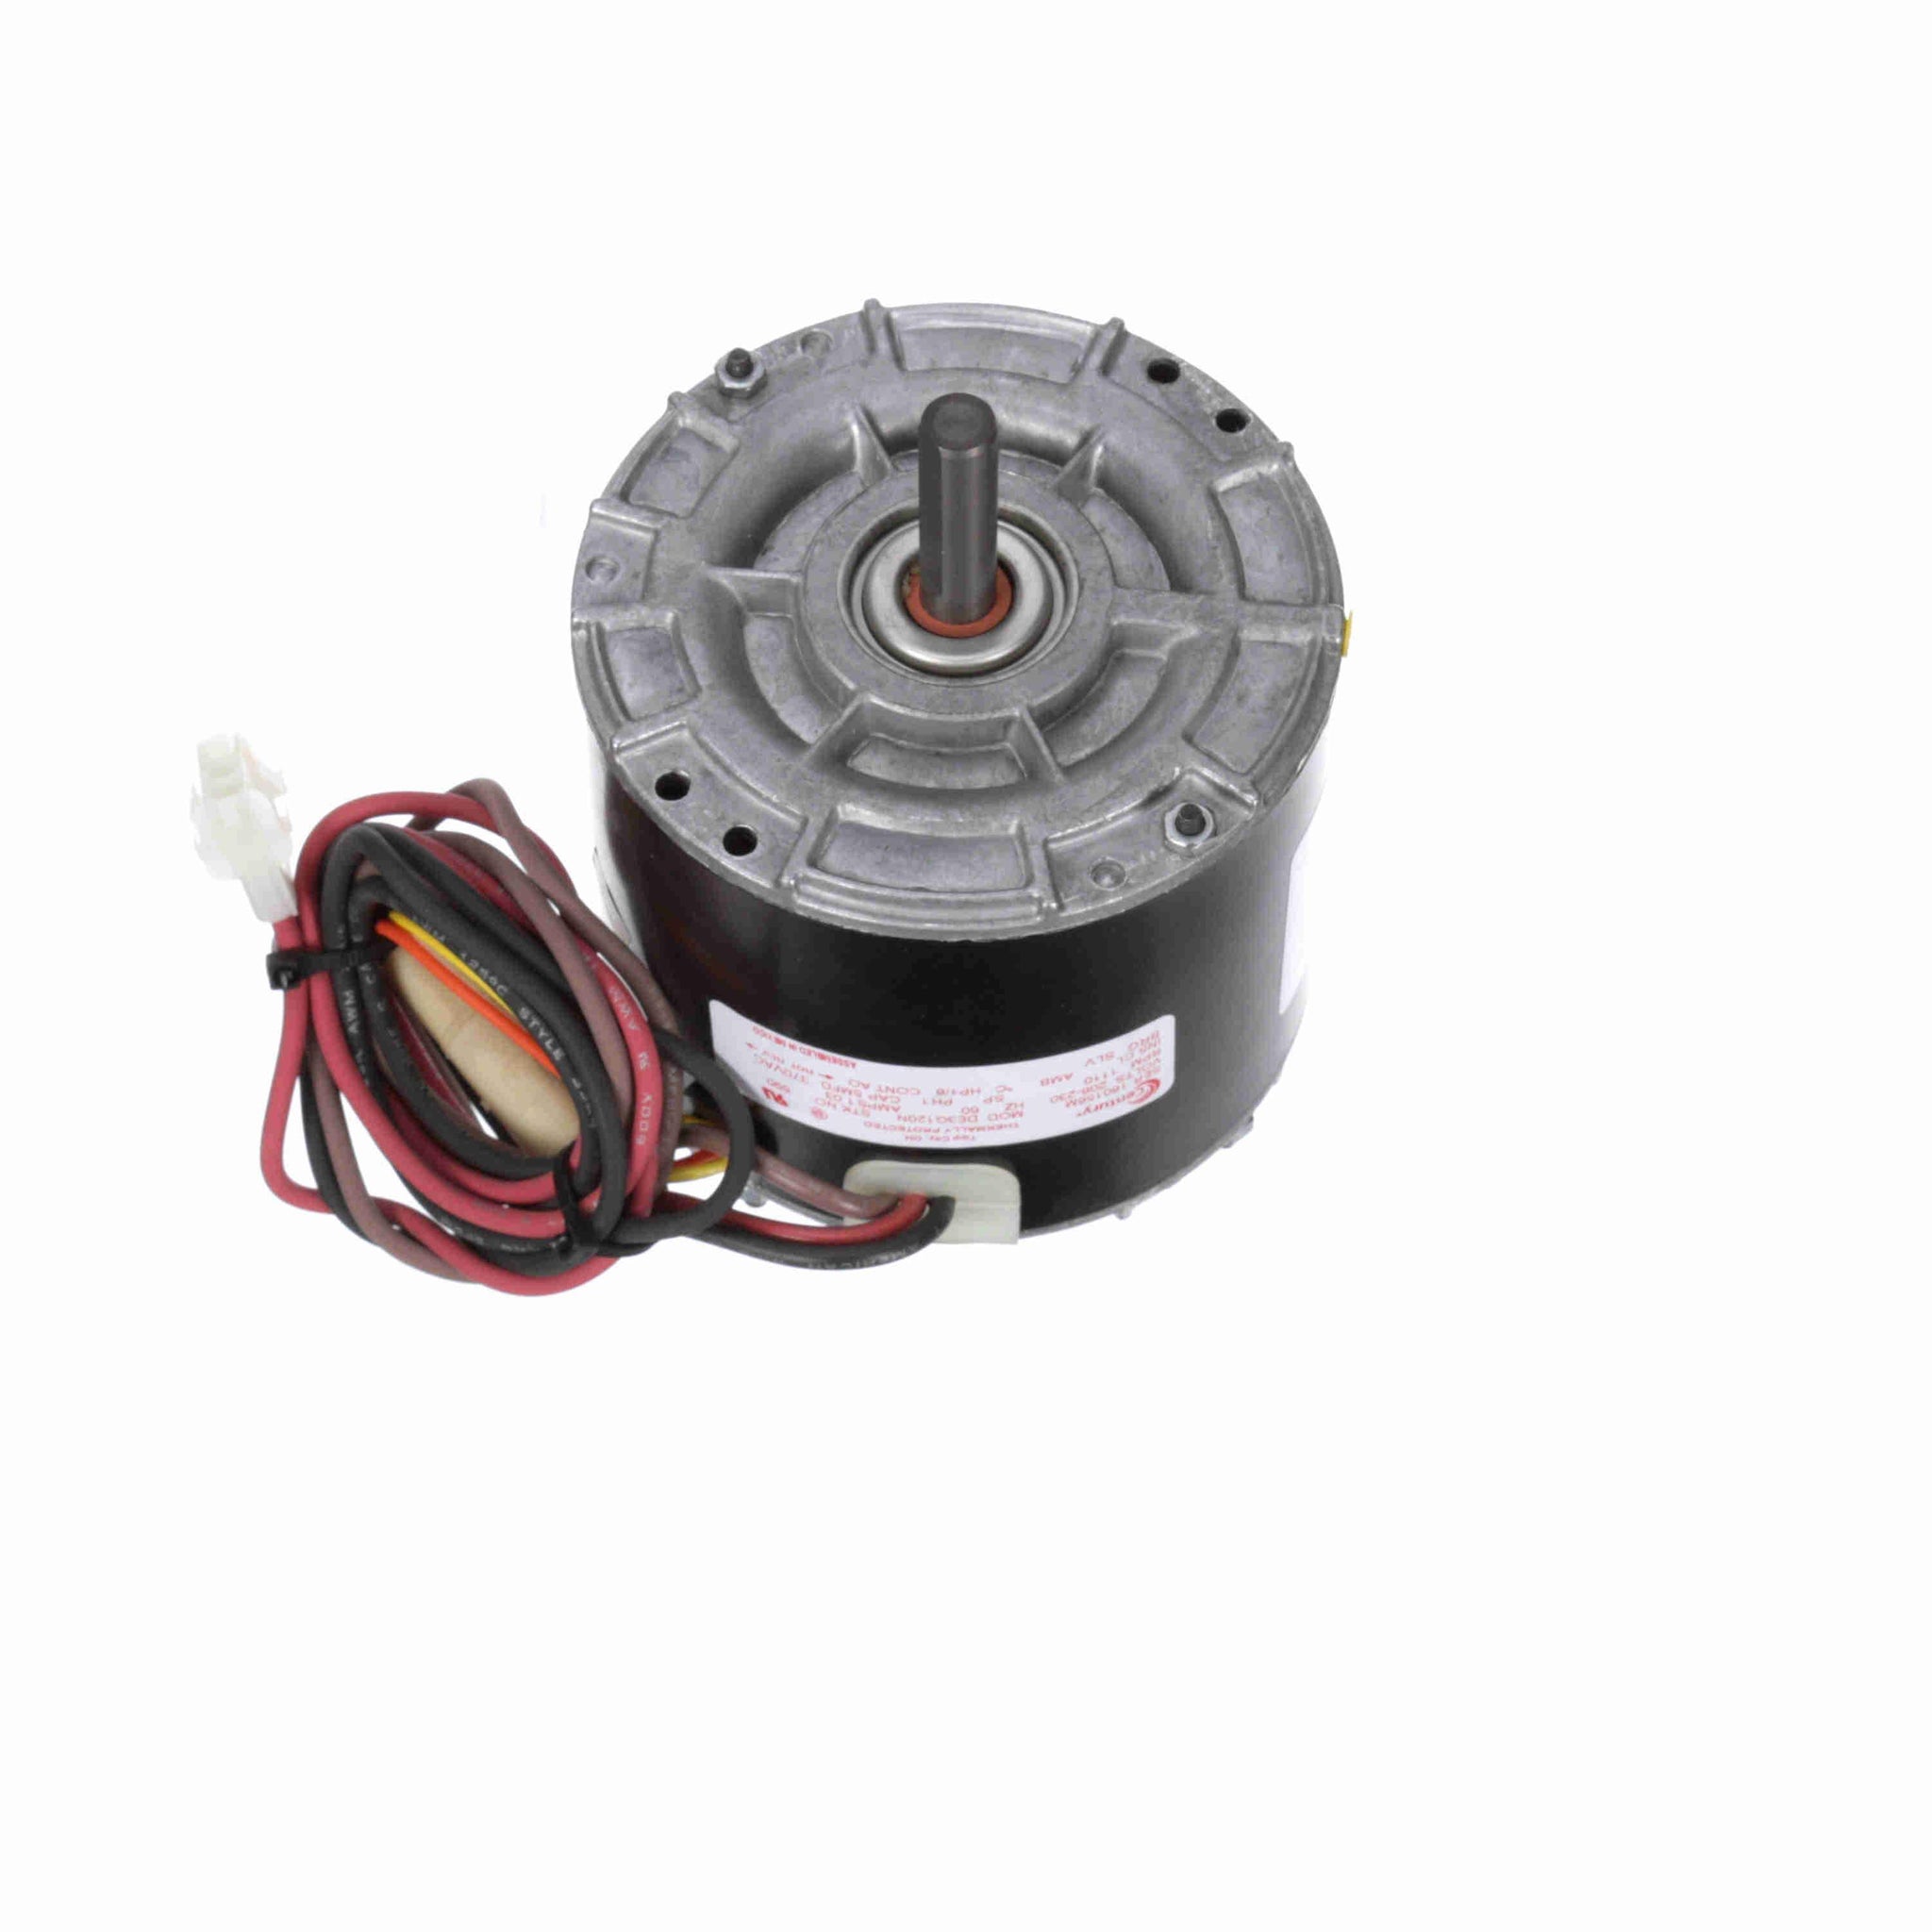 690 -  1/6 HP OEM Replacement Motor, 1110 RPM, 208-230 Volts, 42 Frame, TEAO - Hardware & Moreee